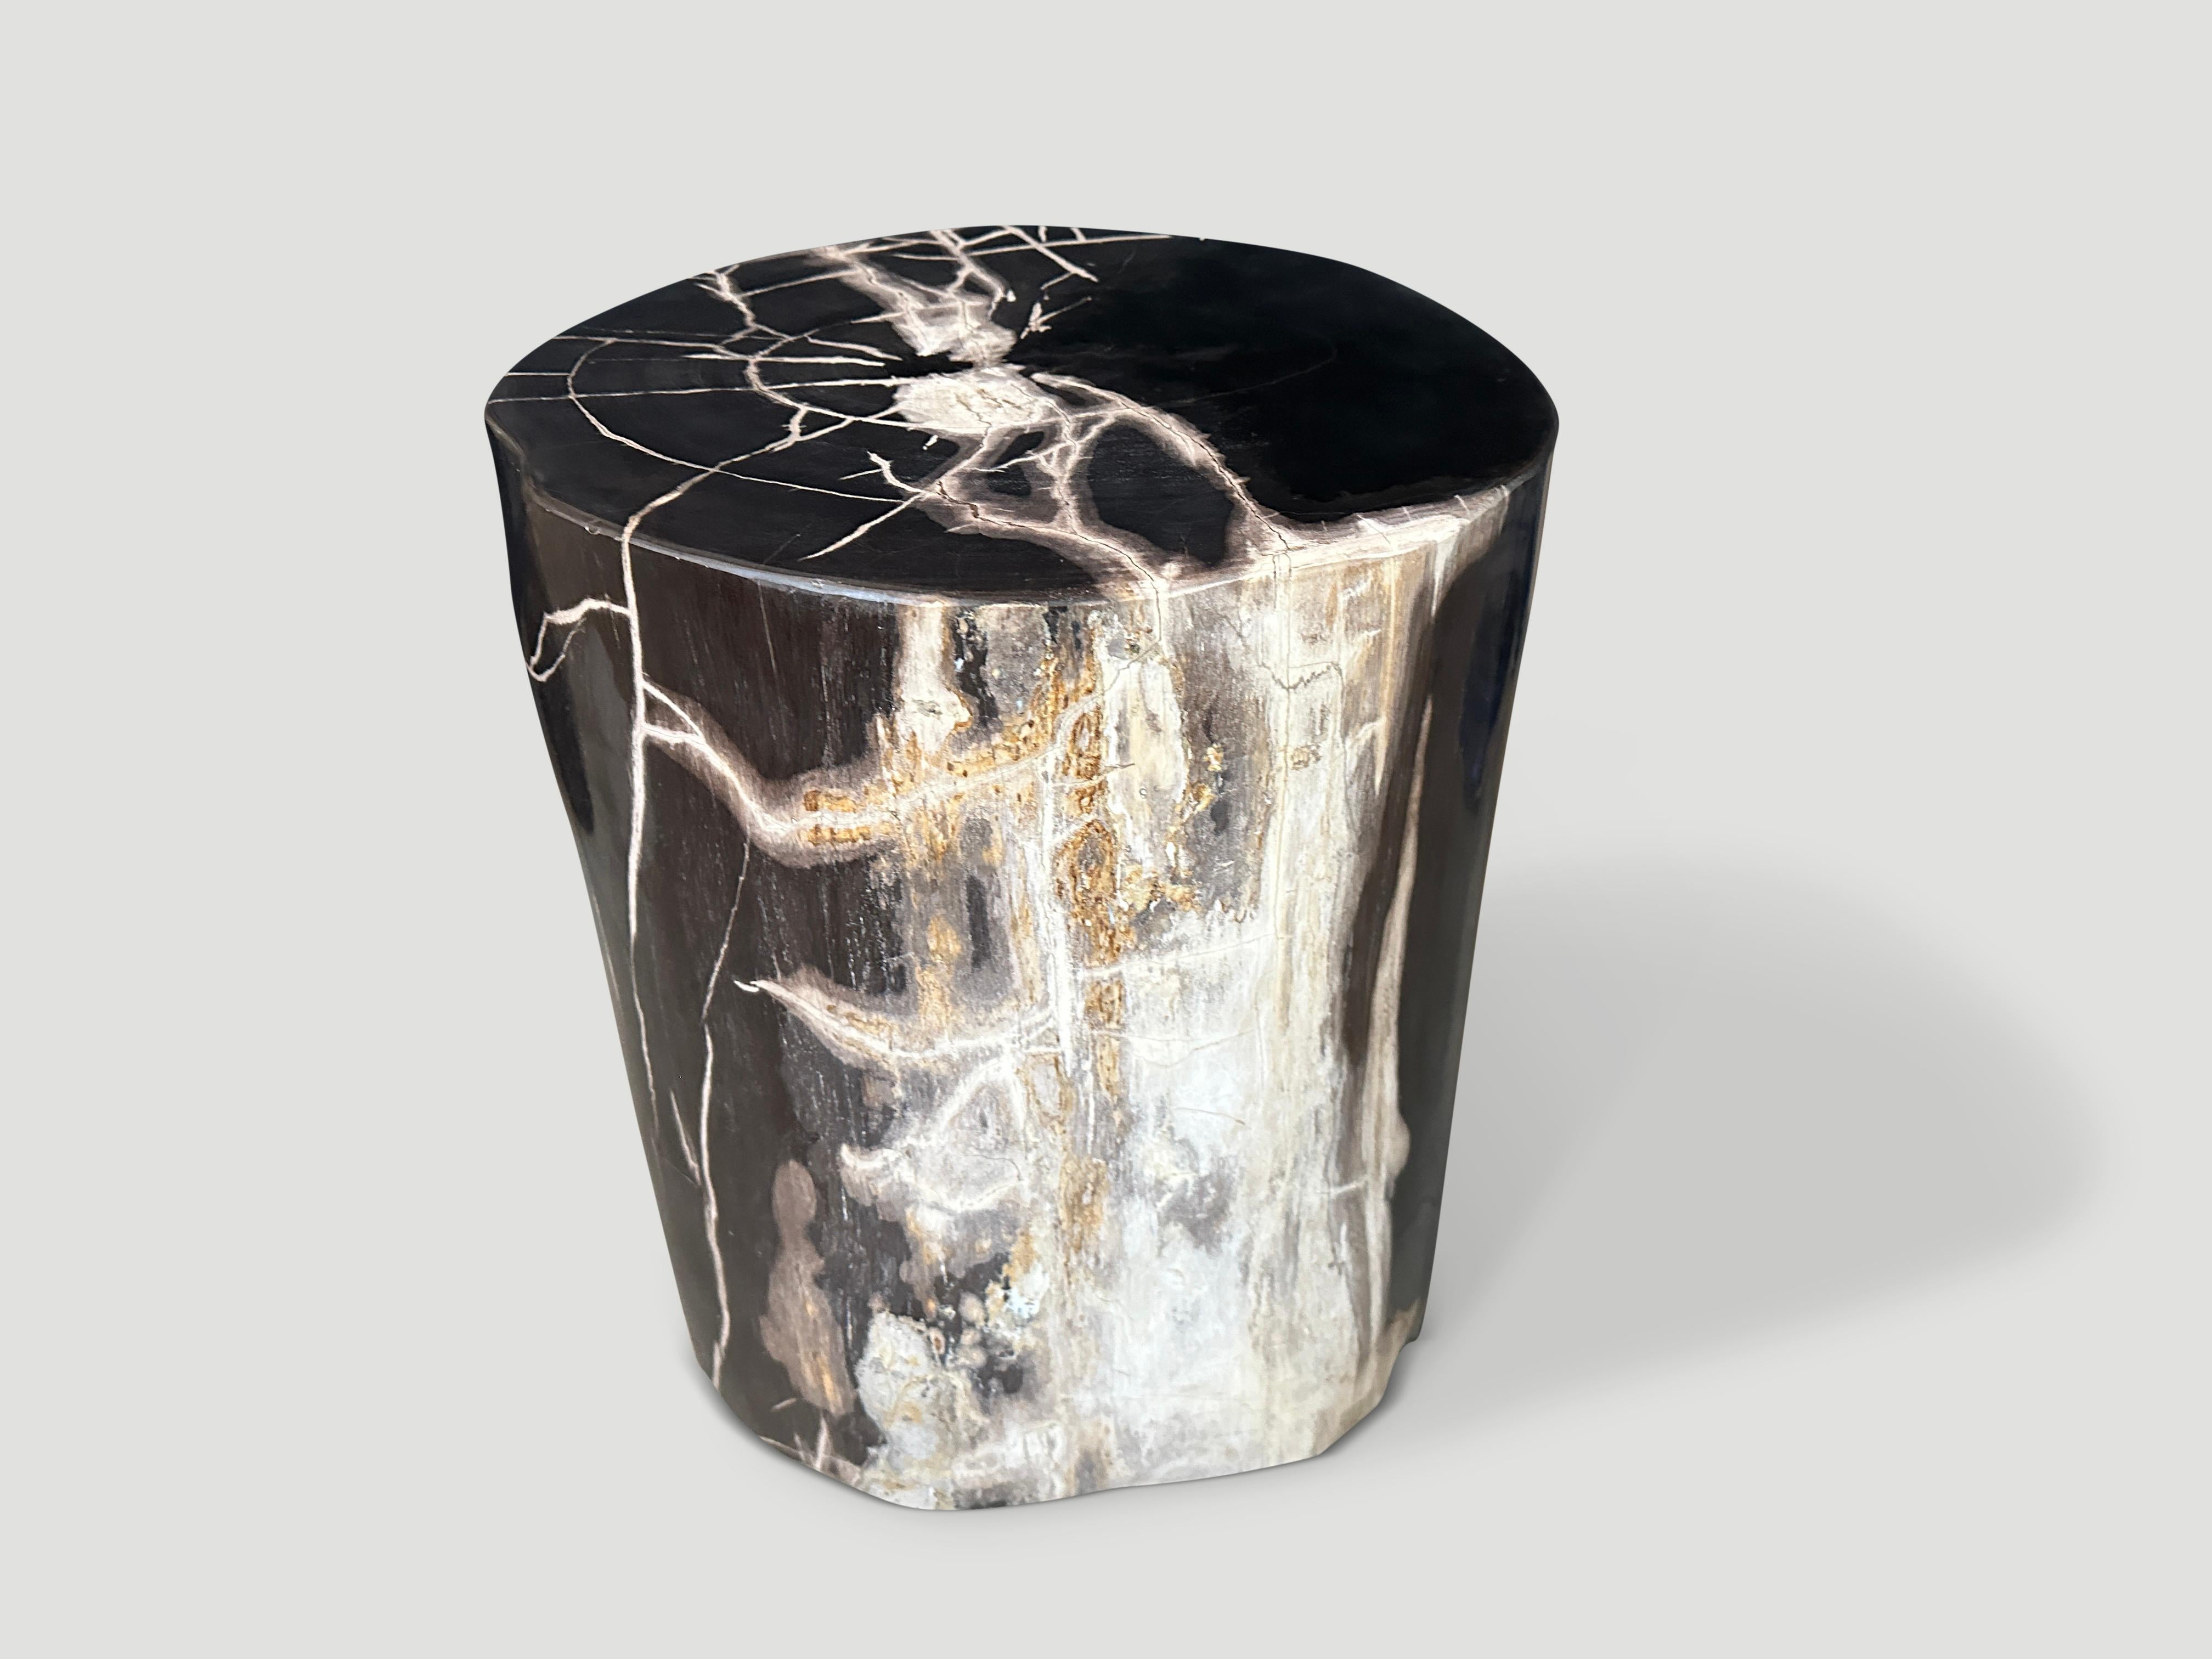 Beautiful dramatic tones and markings on this impressive high quality petrified wood side table. It’s fascinating how Mother Nature produces these exquisite 40 million year old petrified teak logs with such contrasting colors and natural patterns